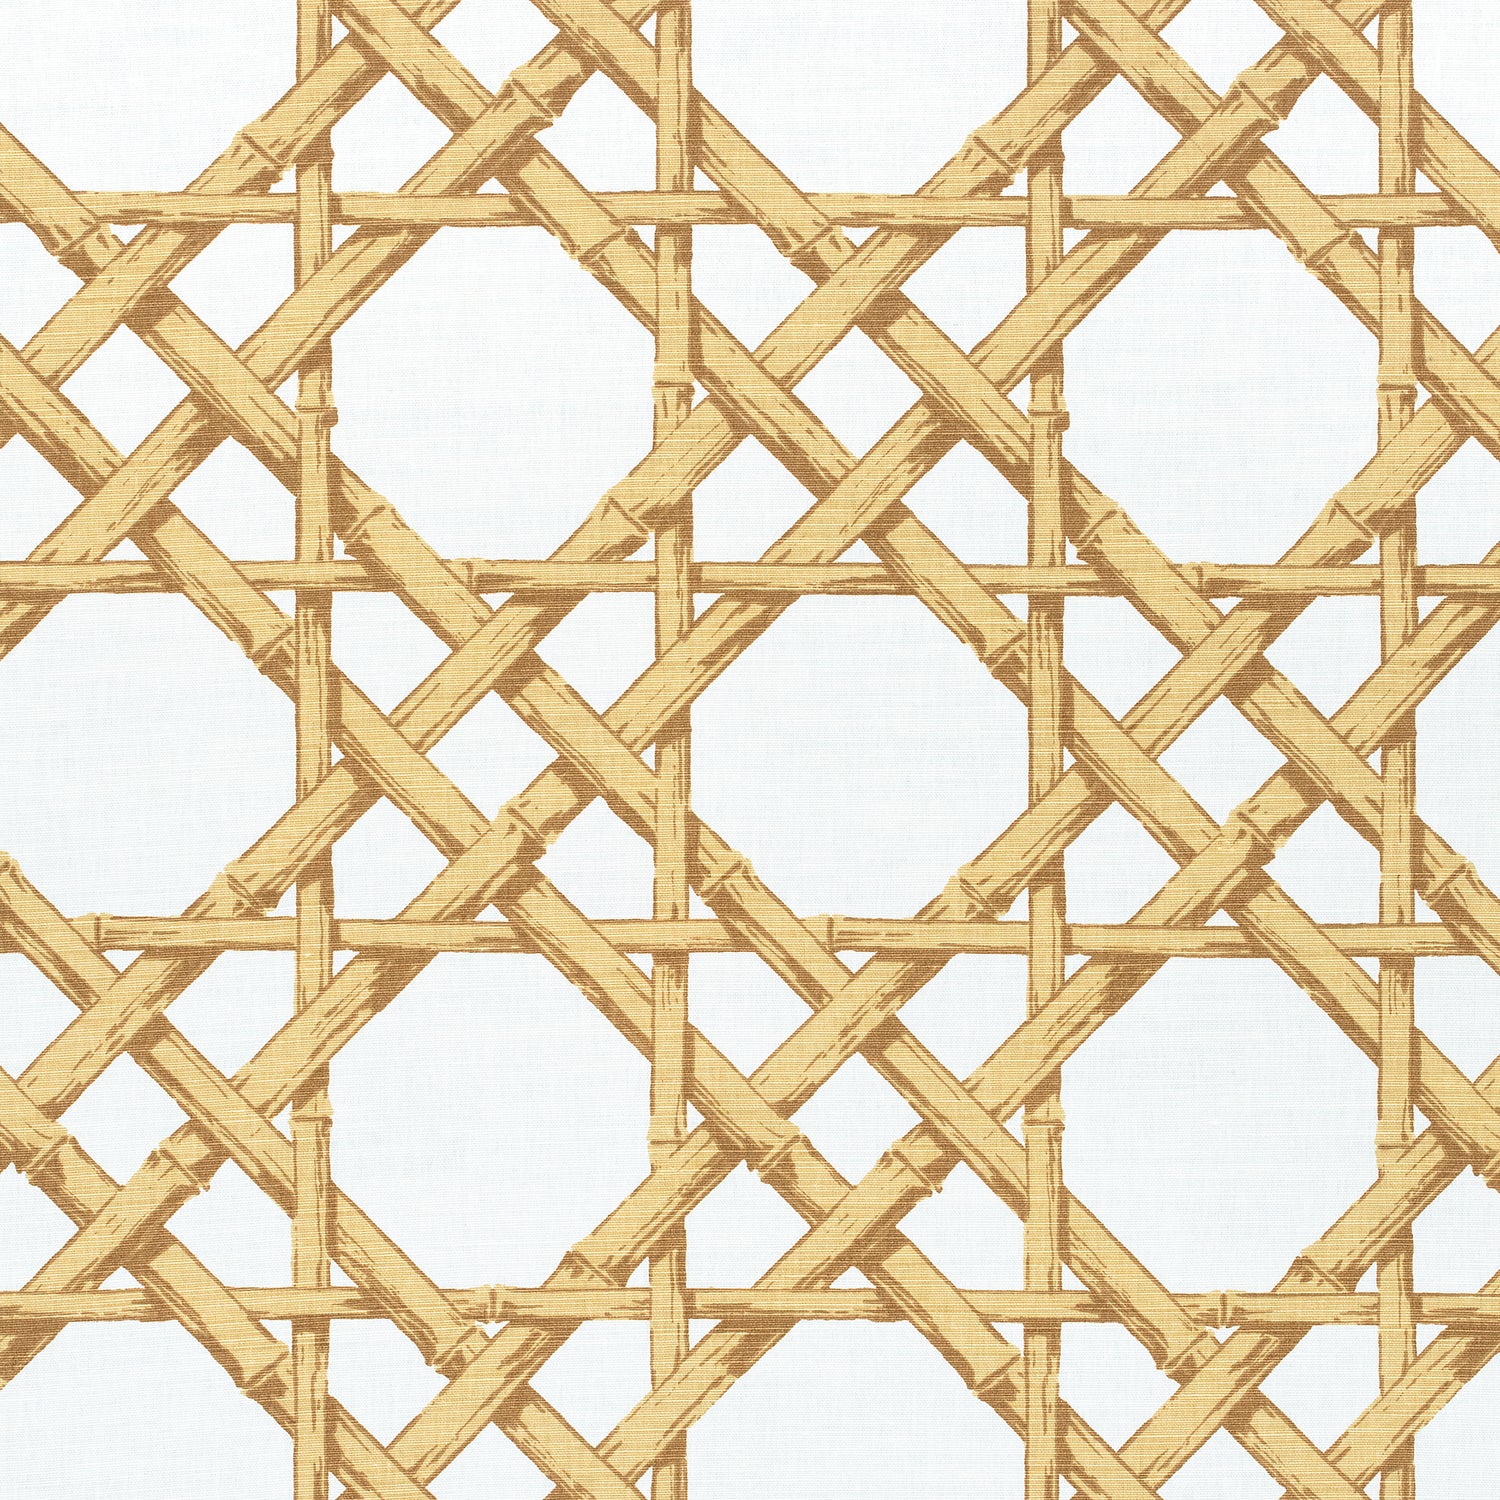 Cyrus Cane fabric in gold color - pattern number F913144 - by Thibaut in the Summer House collection